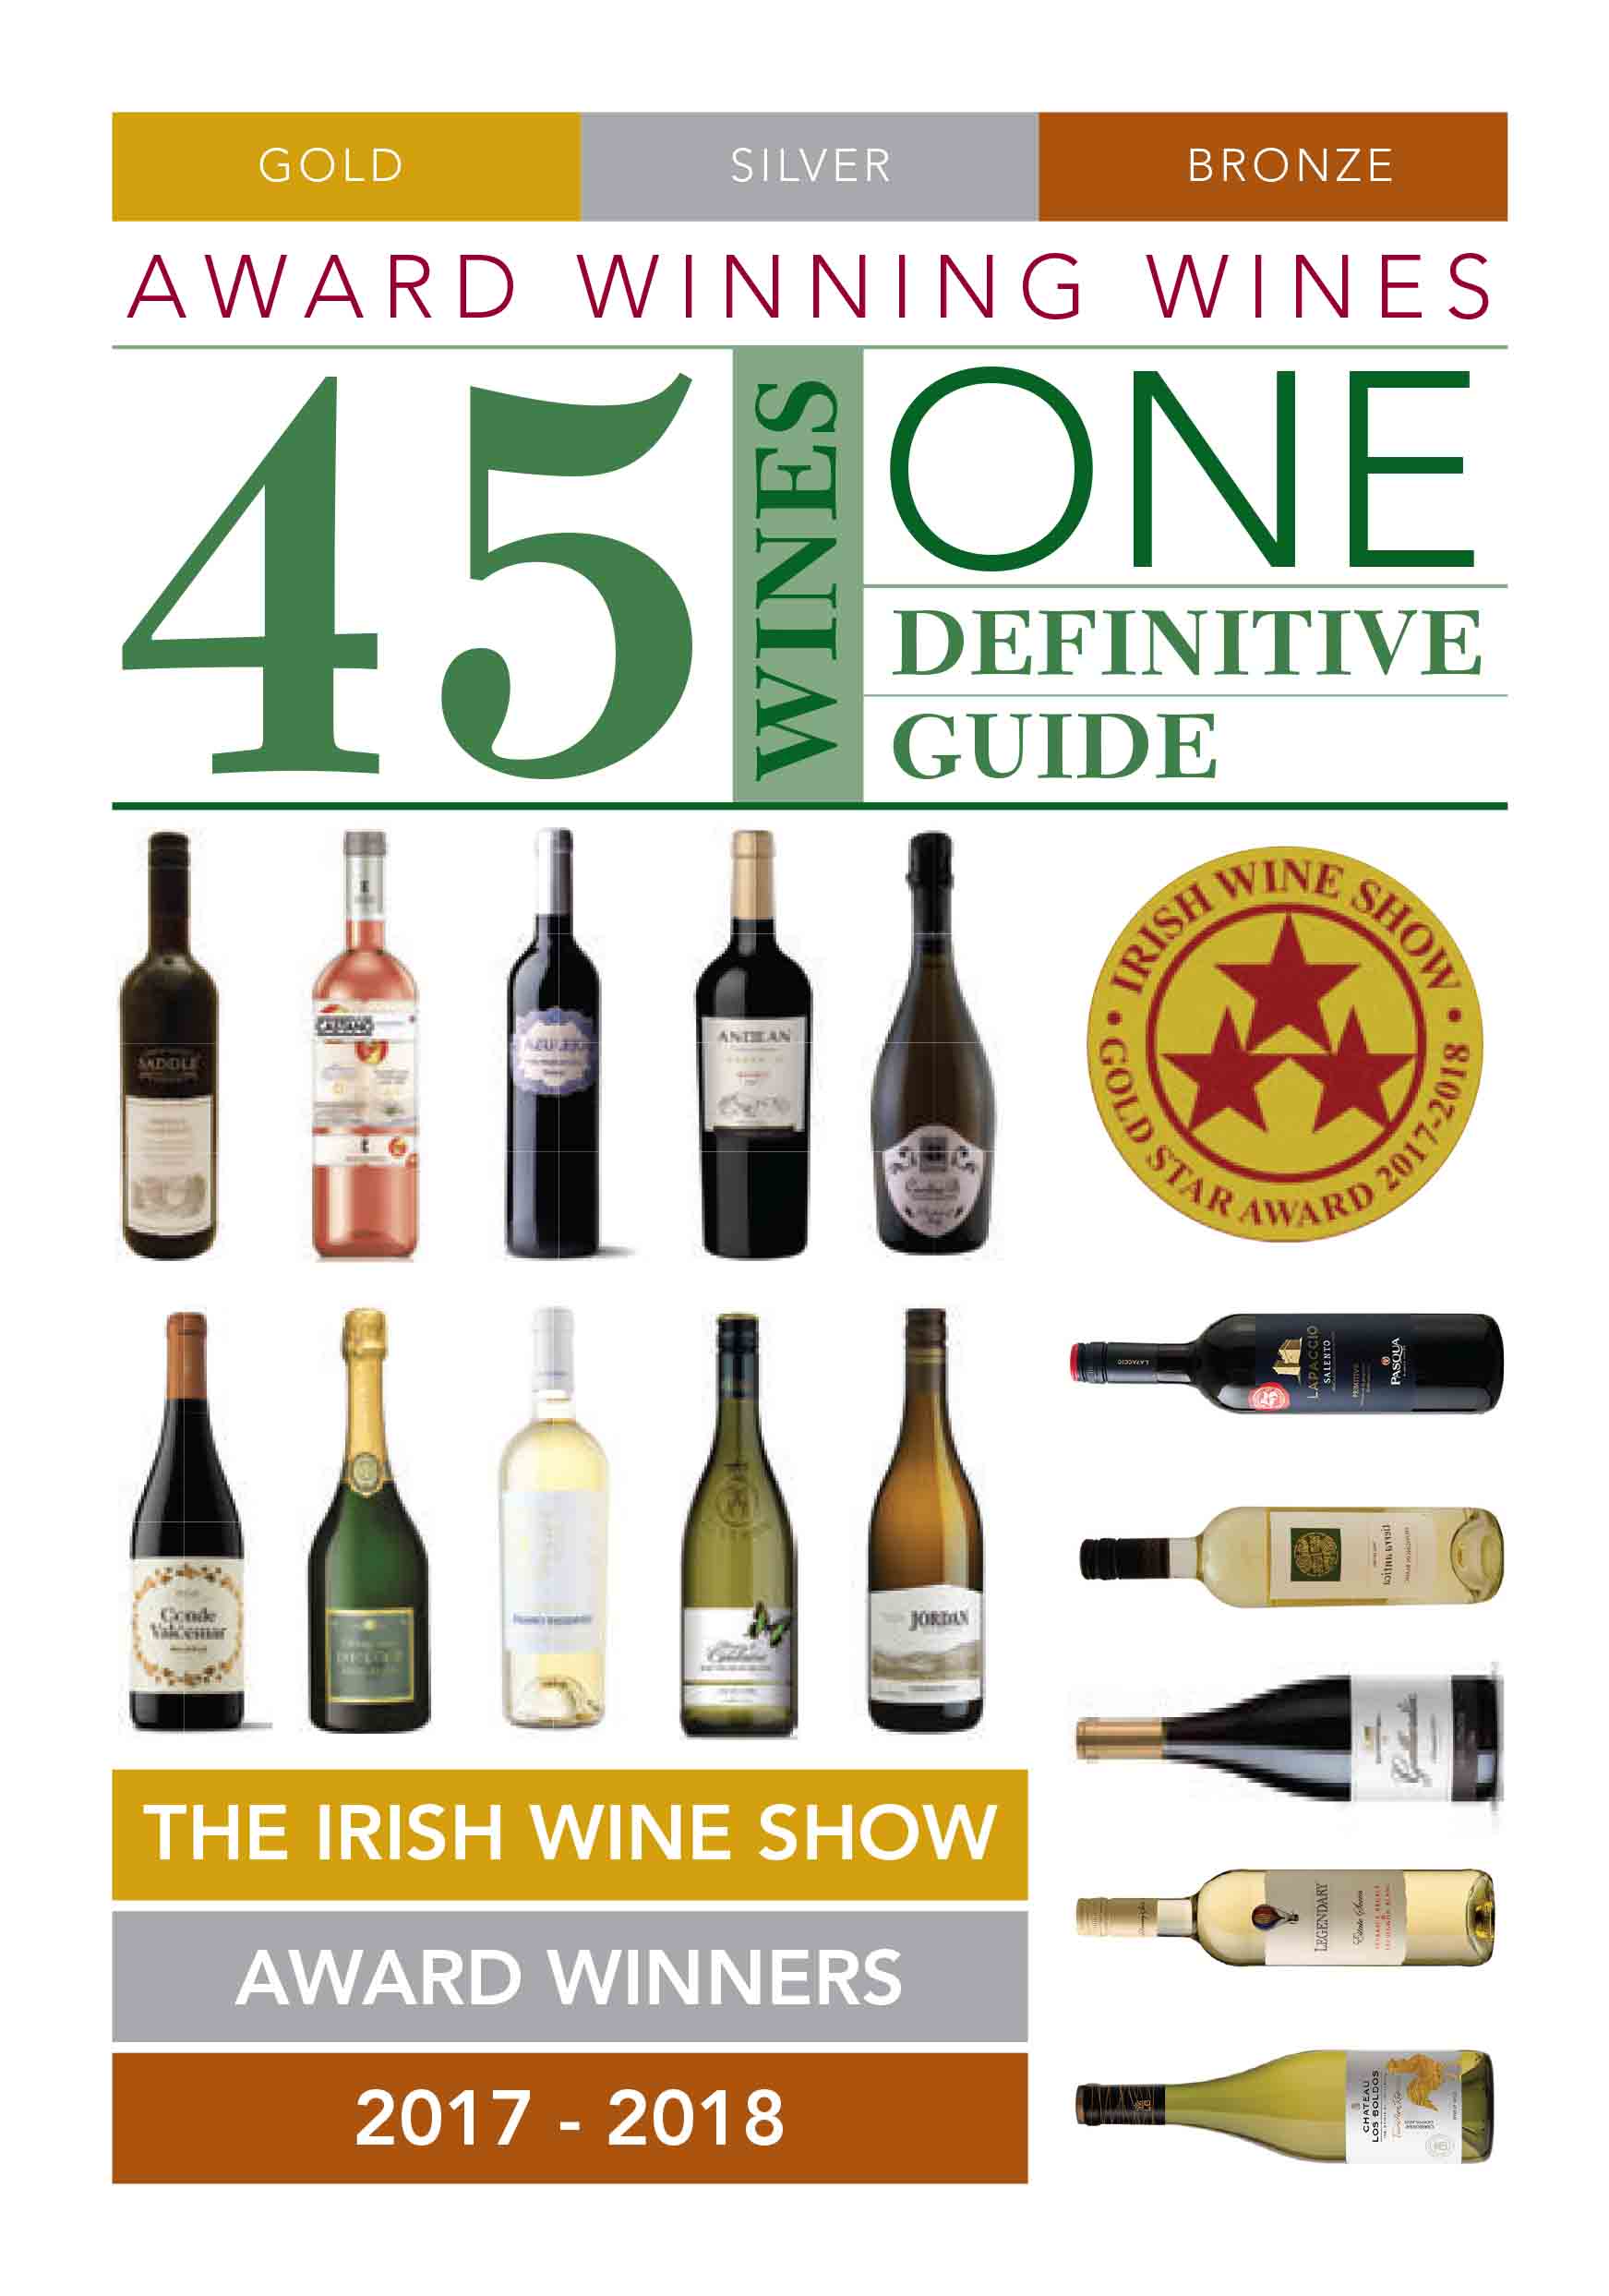 A promotional booklet featuring the Award-winning wines is also available with tasting notes on each winner.